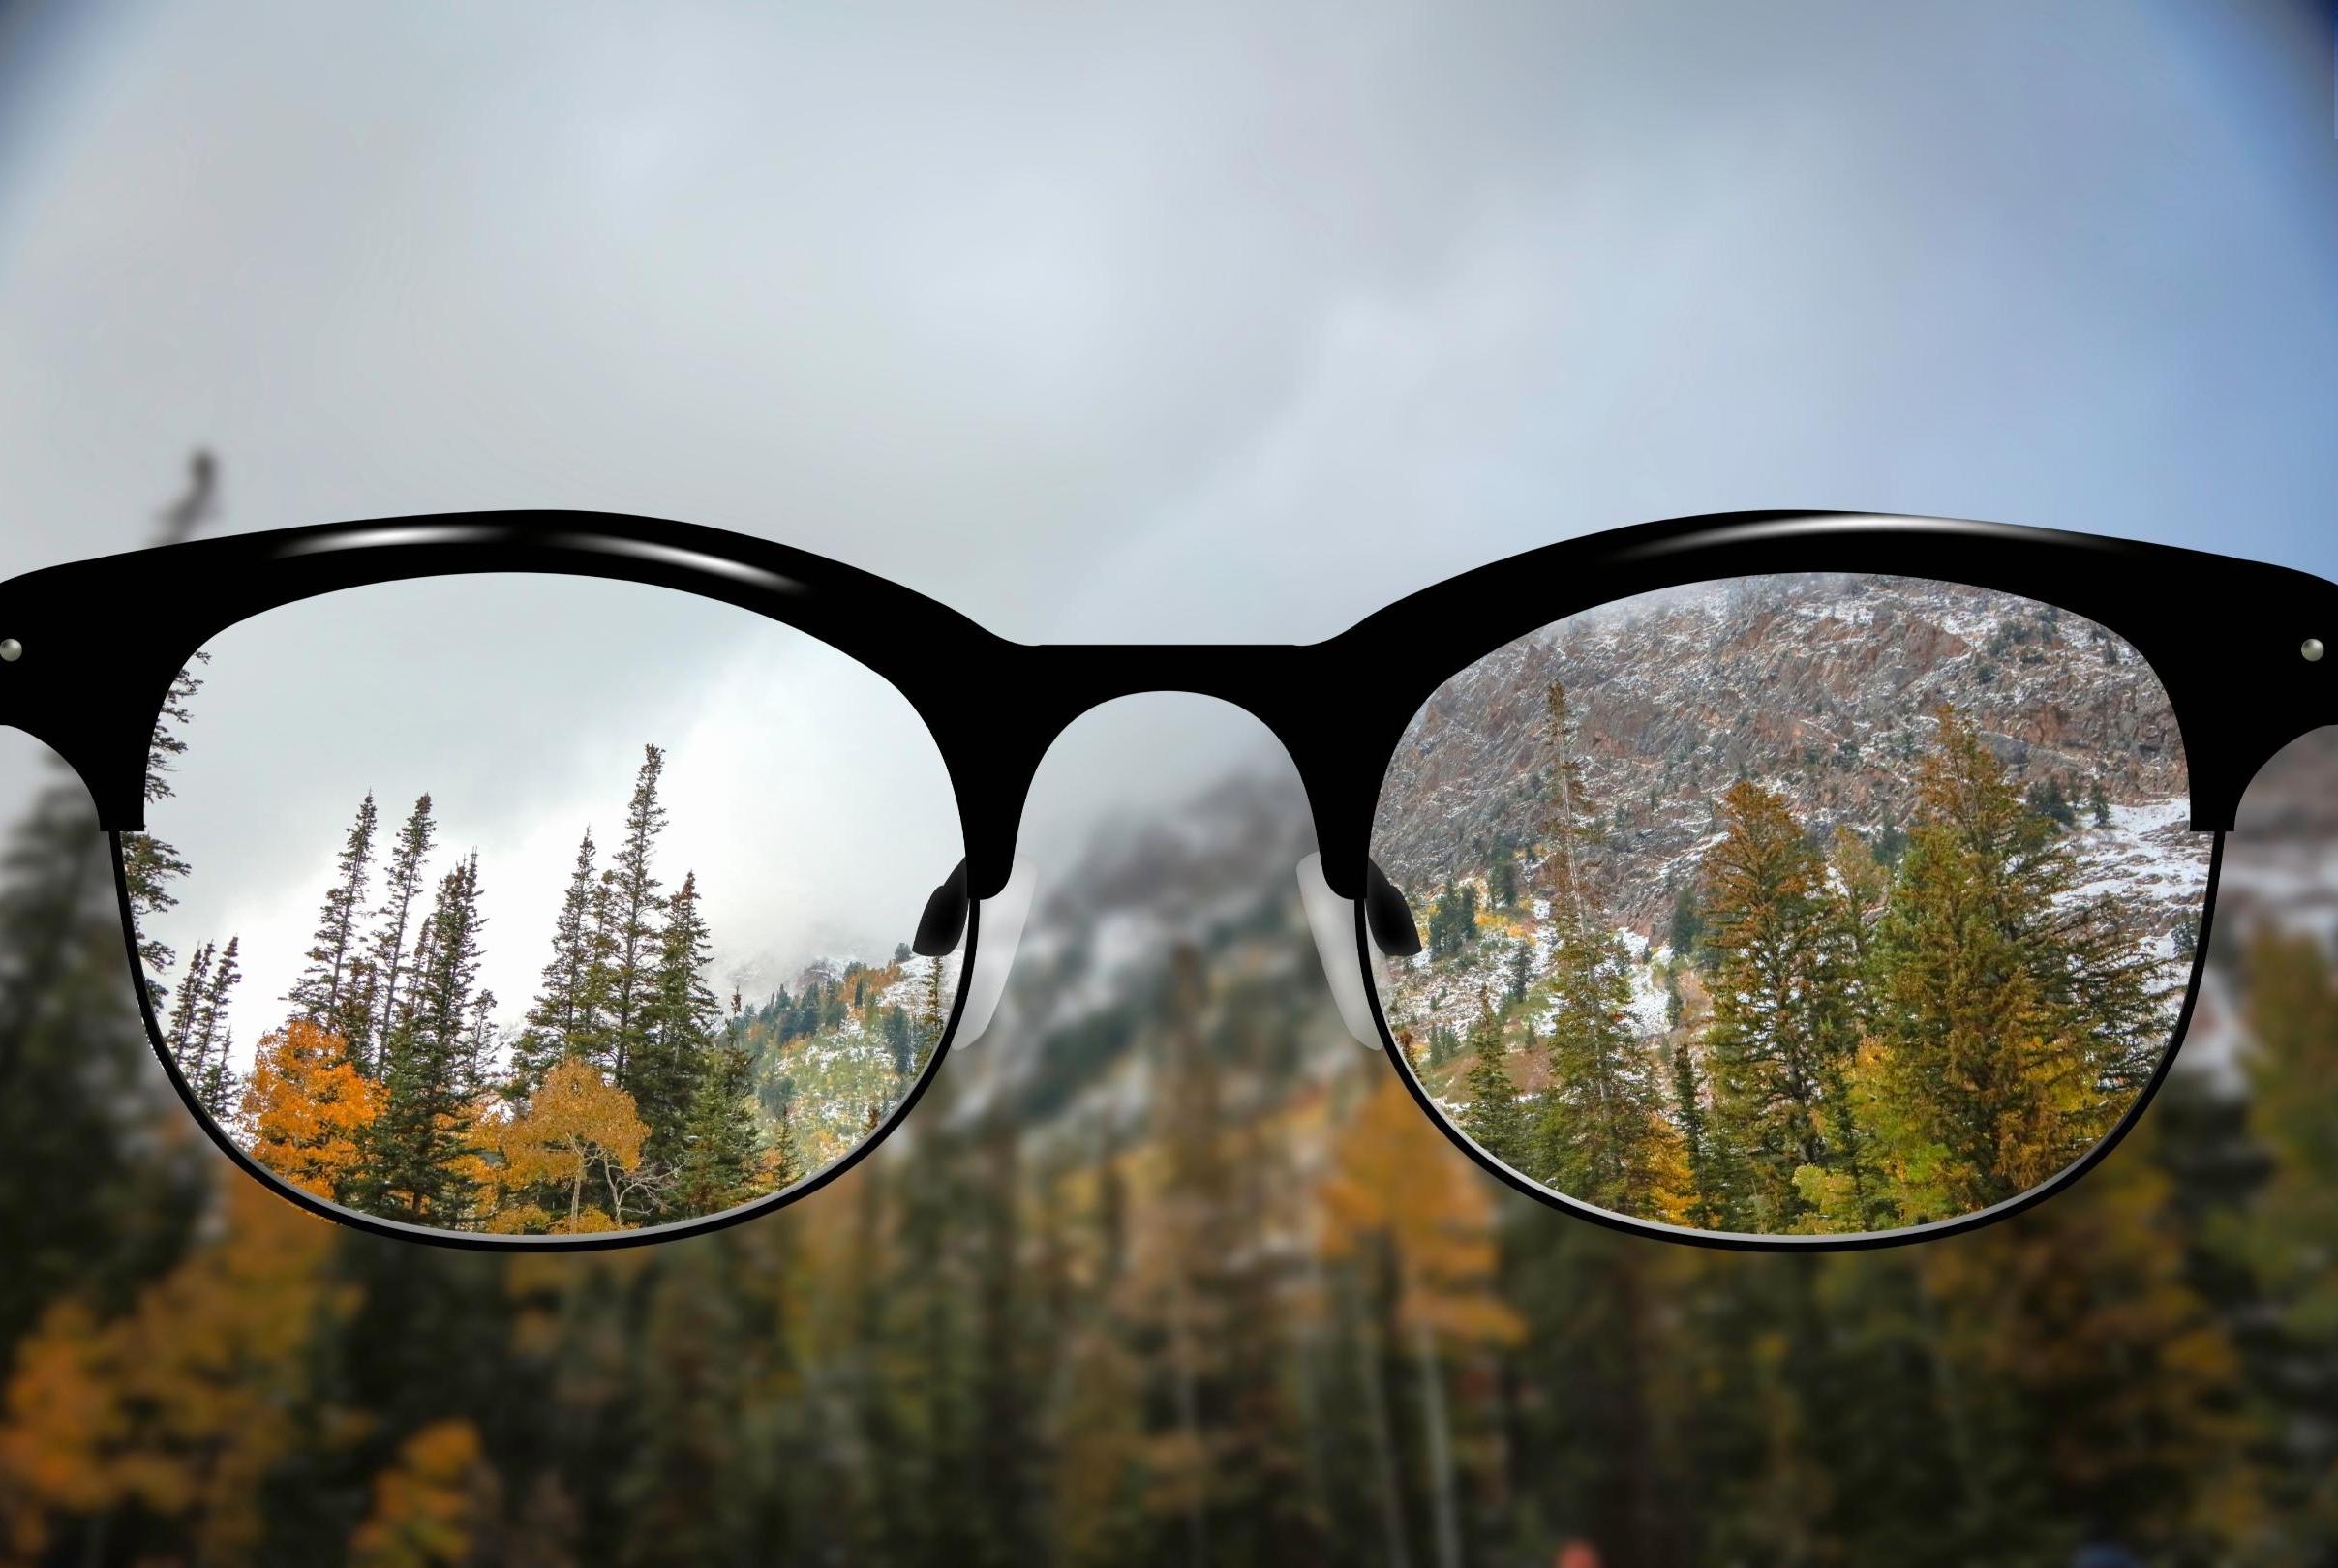 Blurry mountains with clear vision through eye glasses